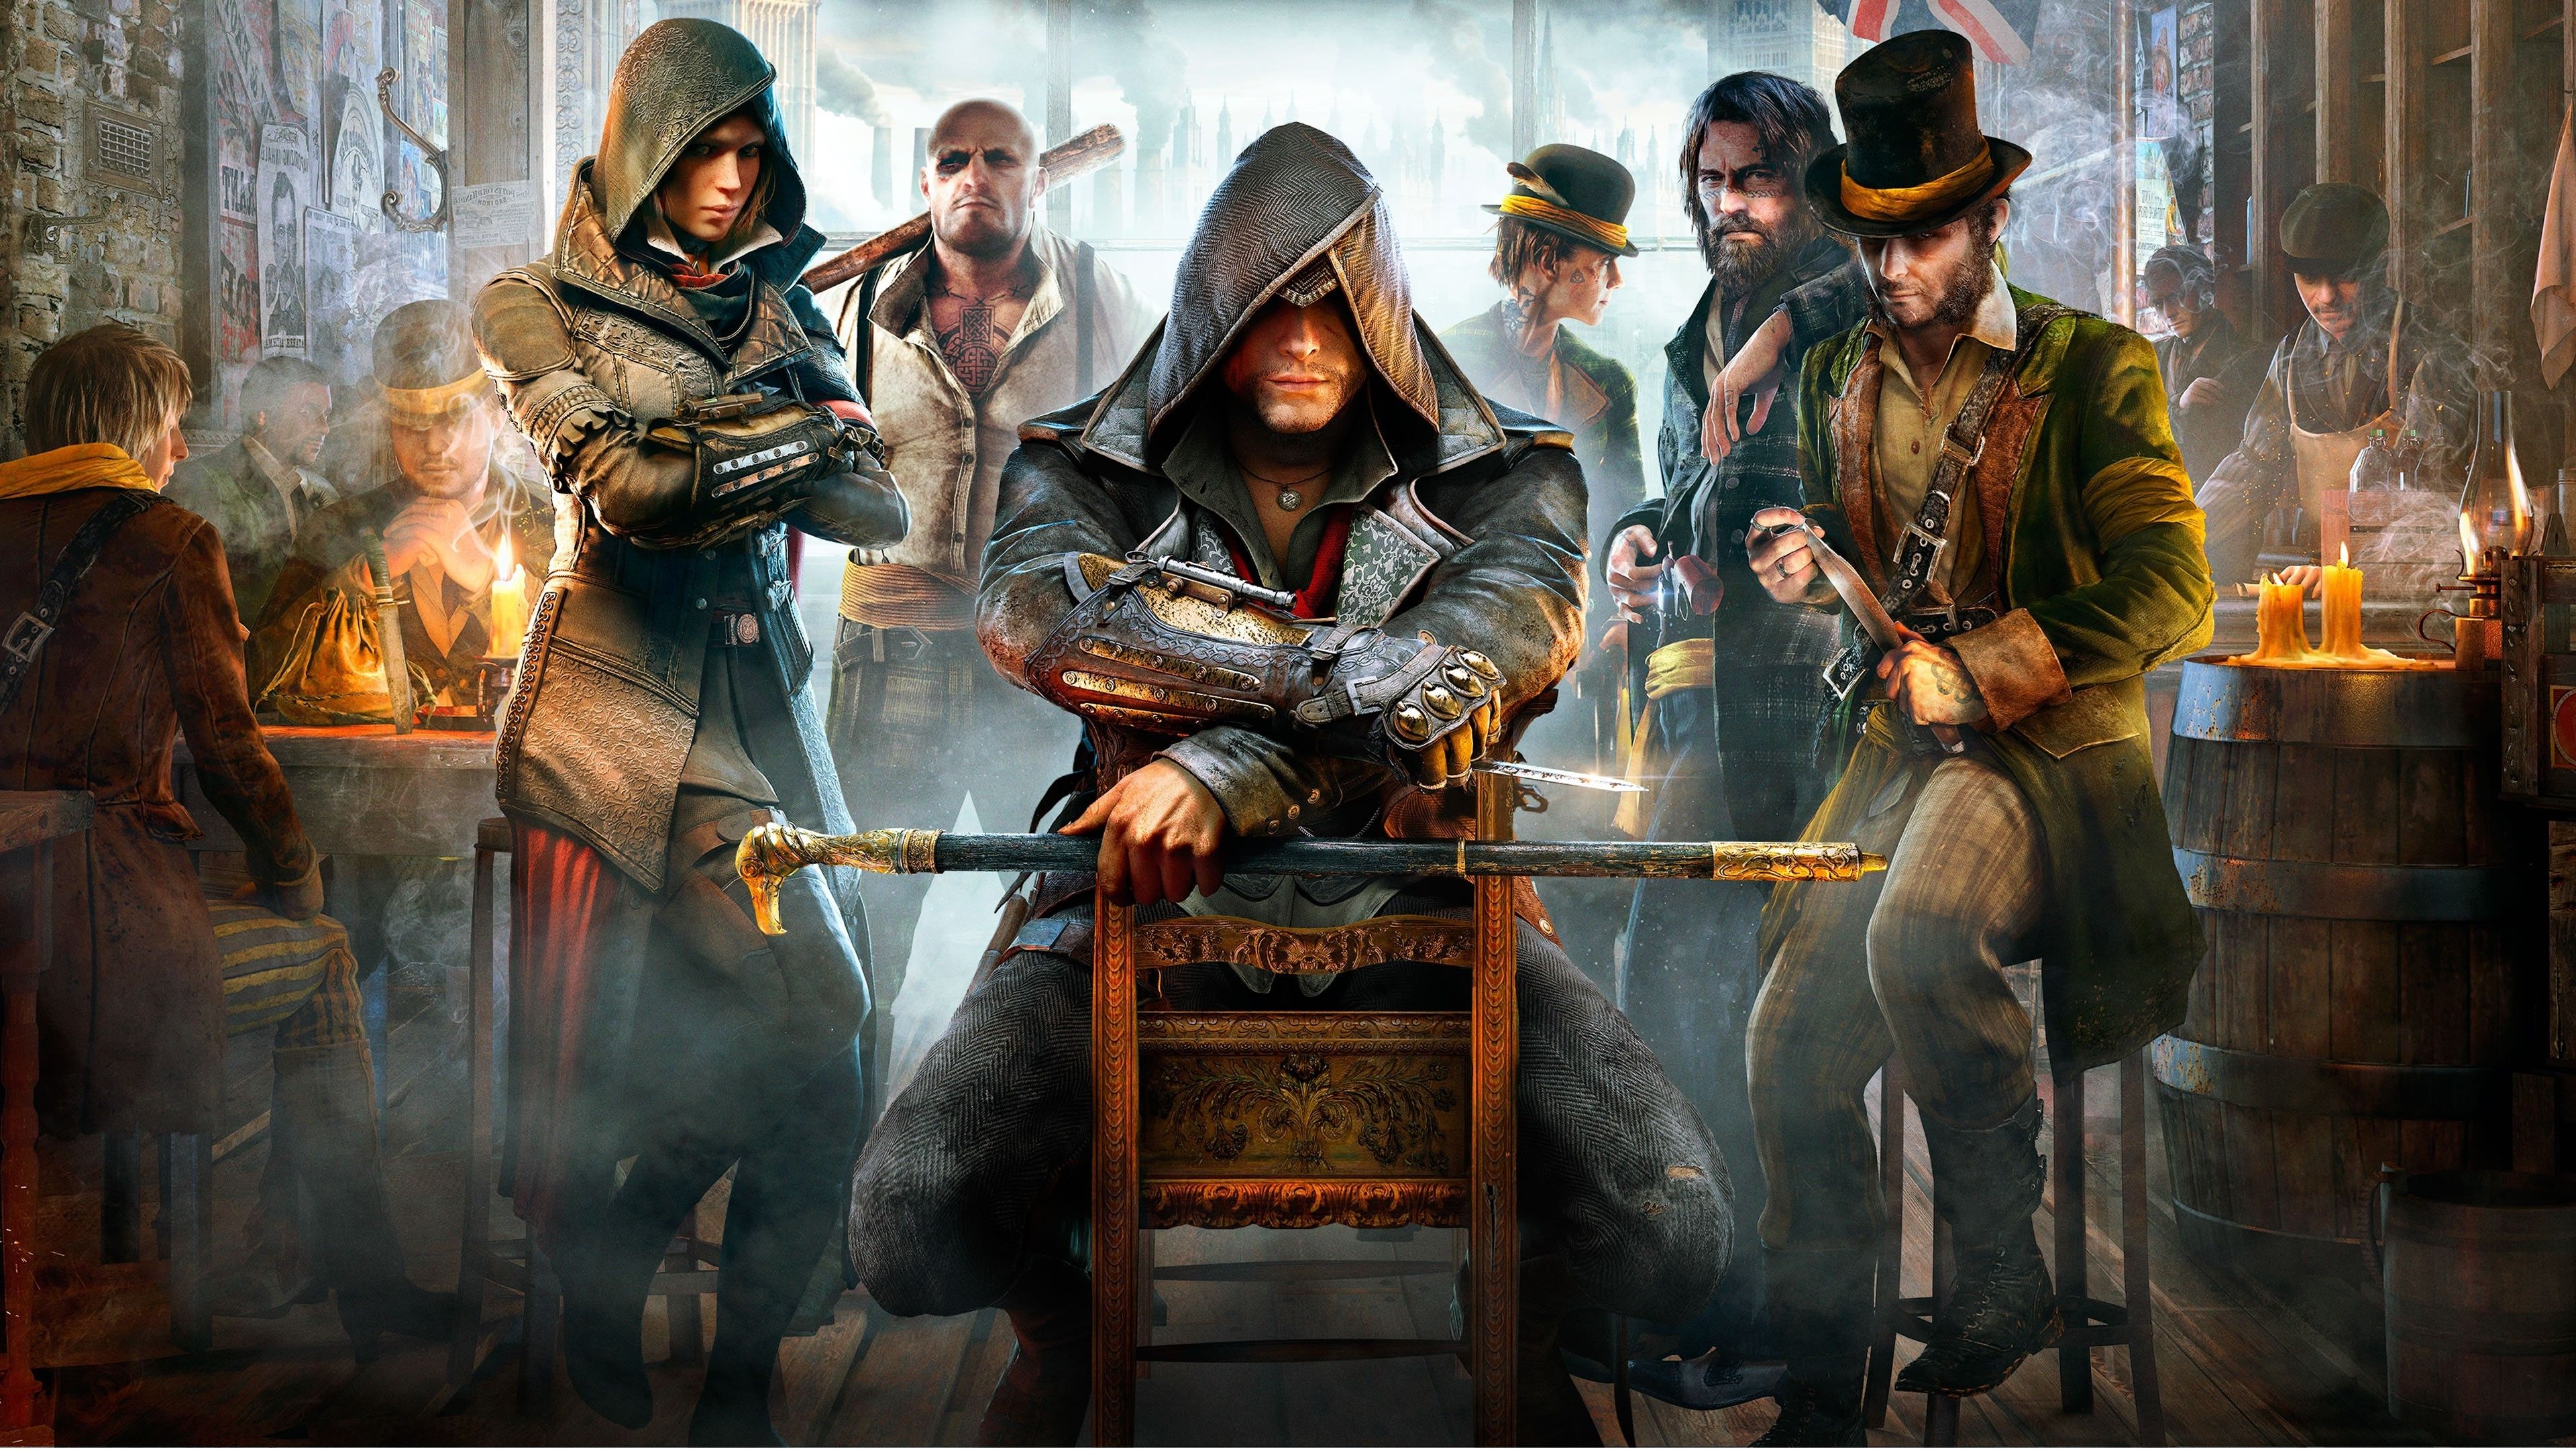 Syndicate Hd Wallpapers - Assassins Creed Syndicate Wallpaper Hd